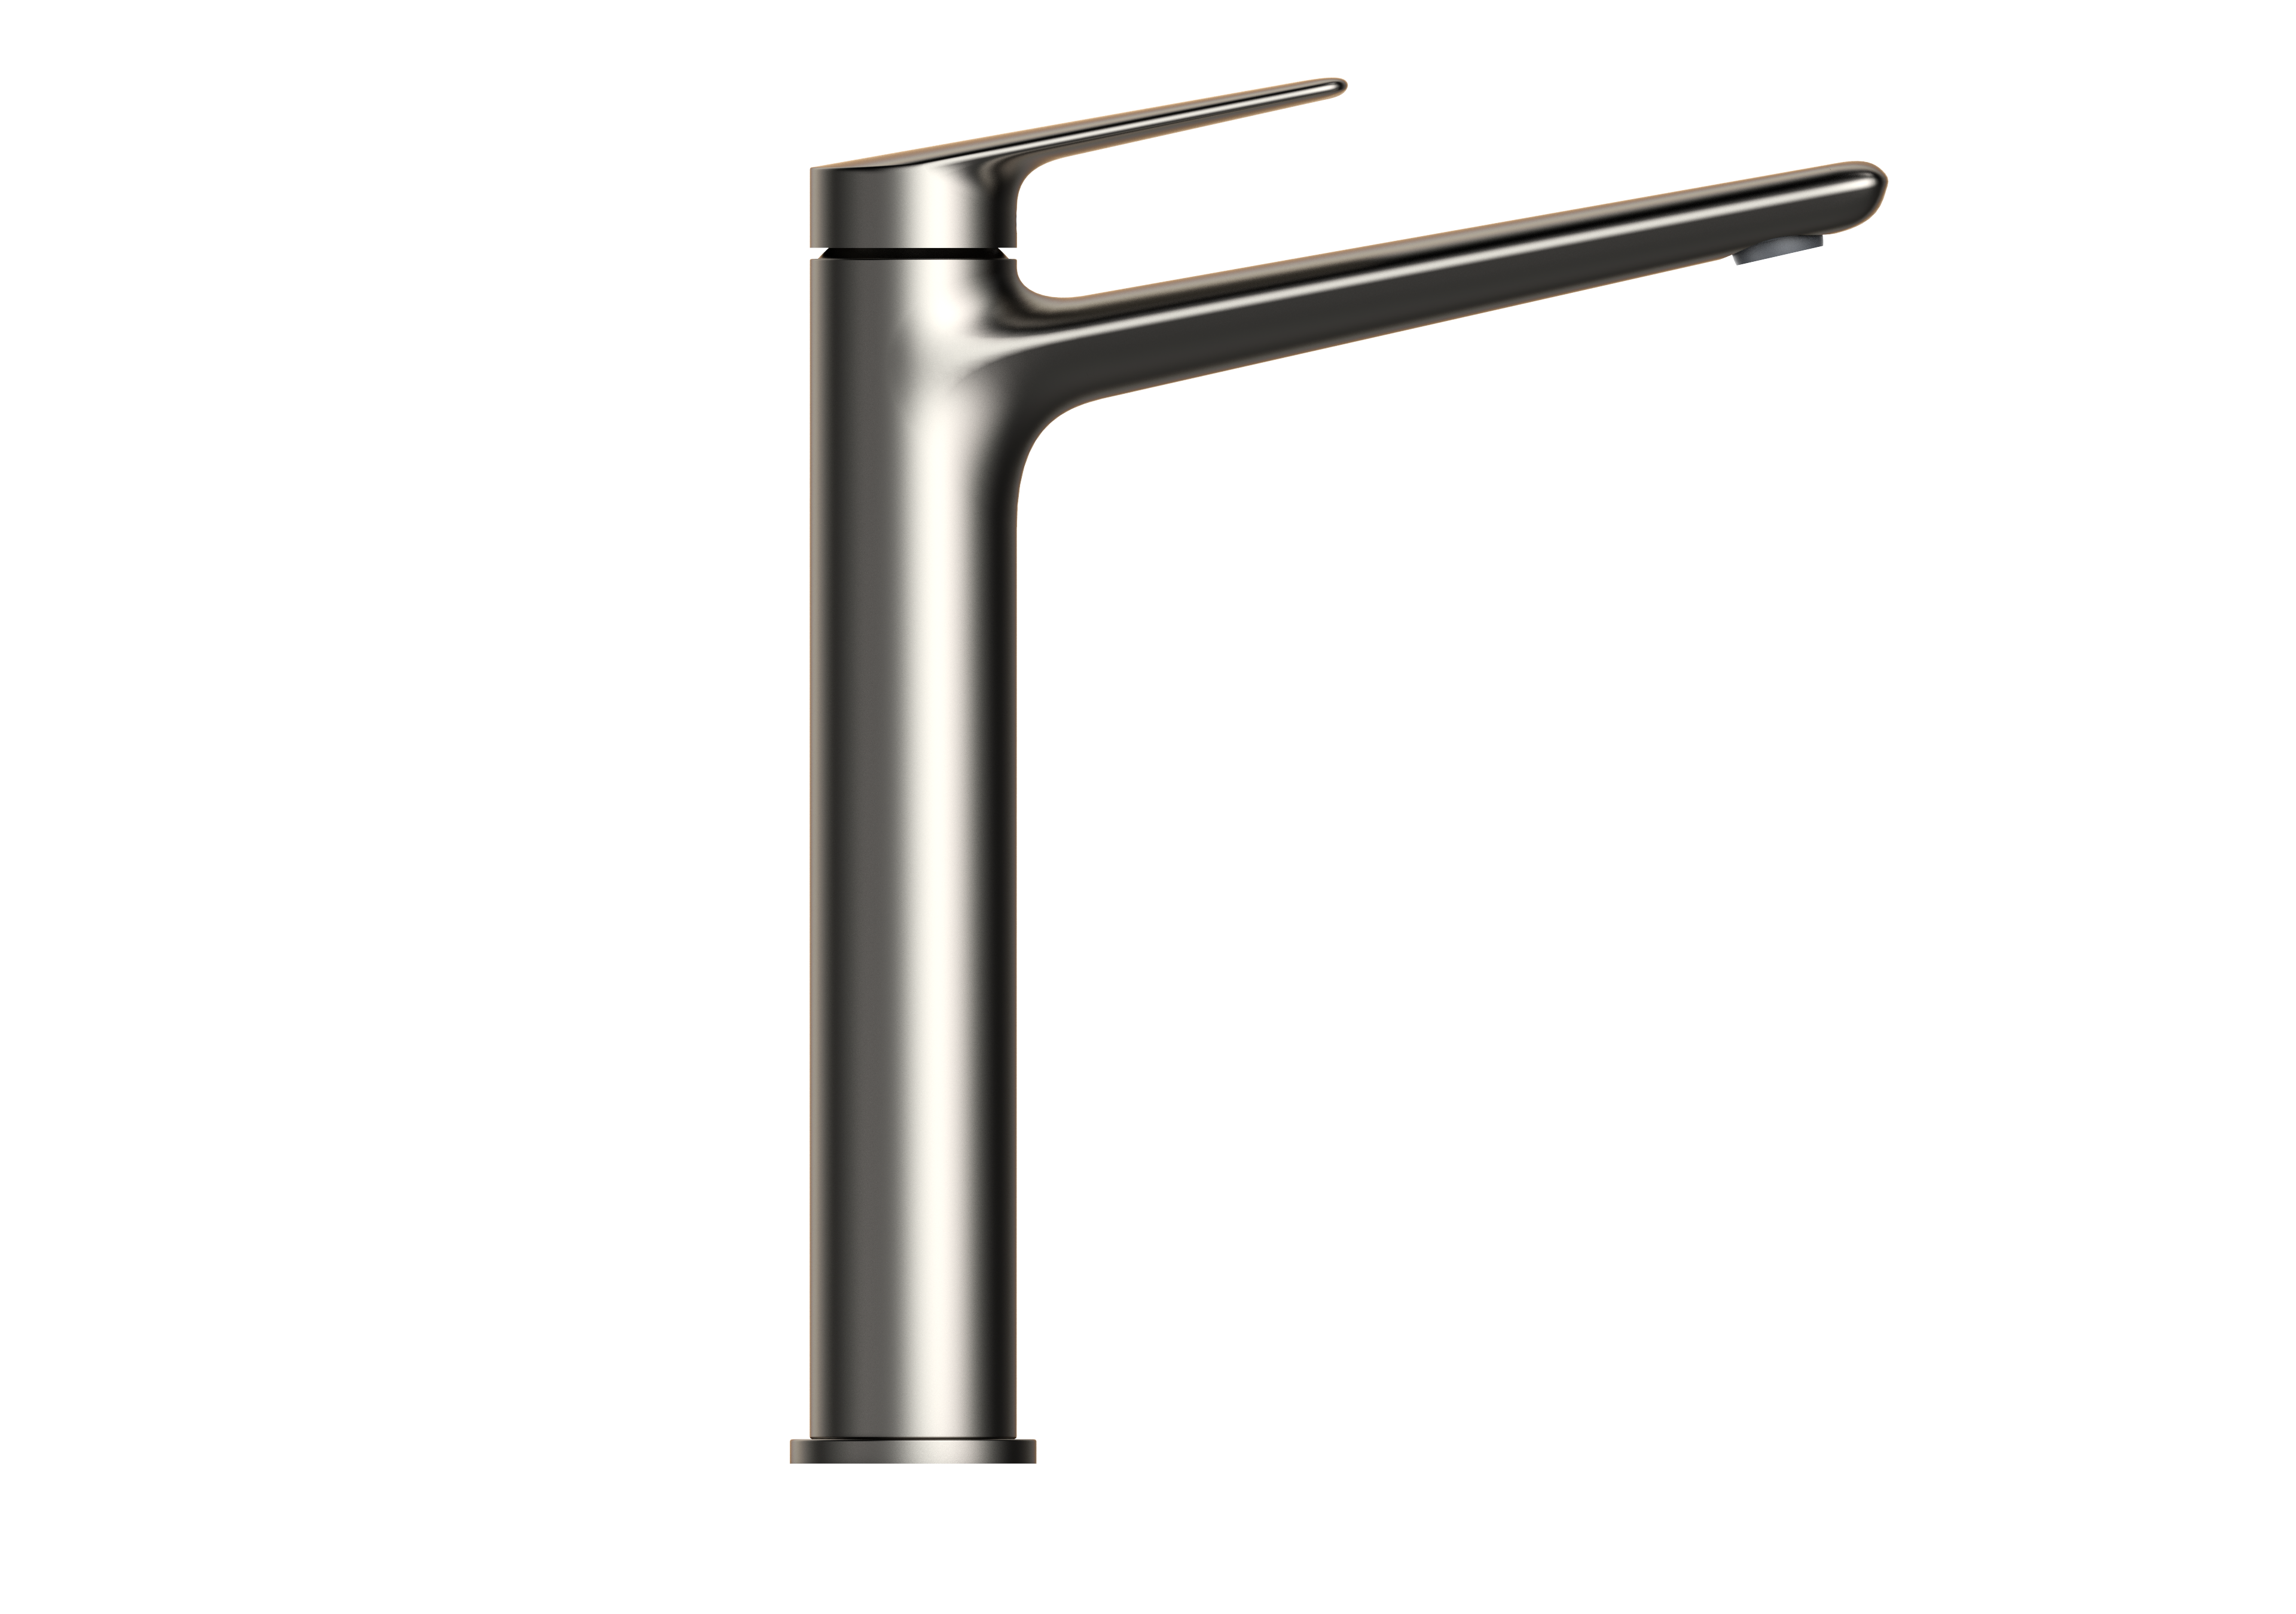 How do Brass Basin Faucets contribute to water conservation efforts in comparison to other faucet materials?